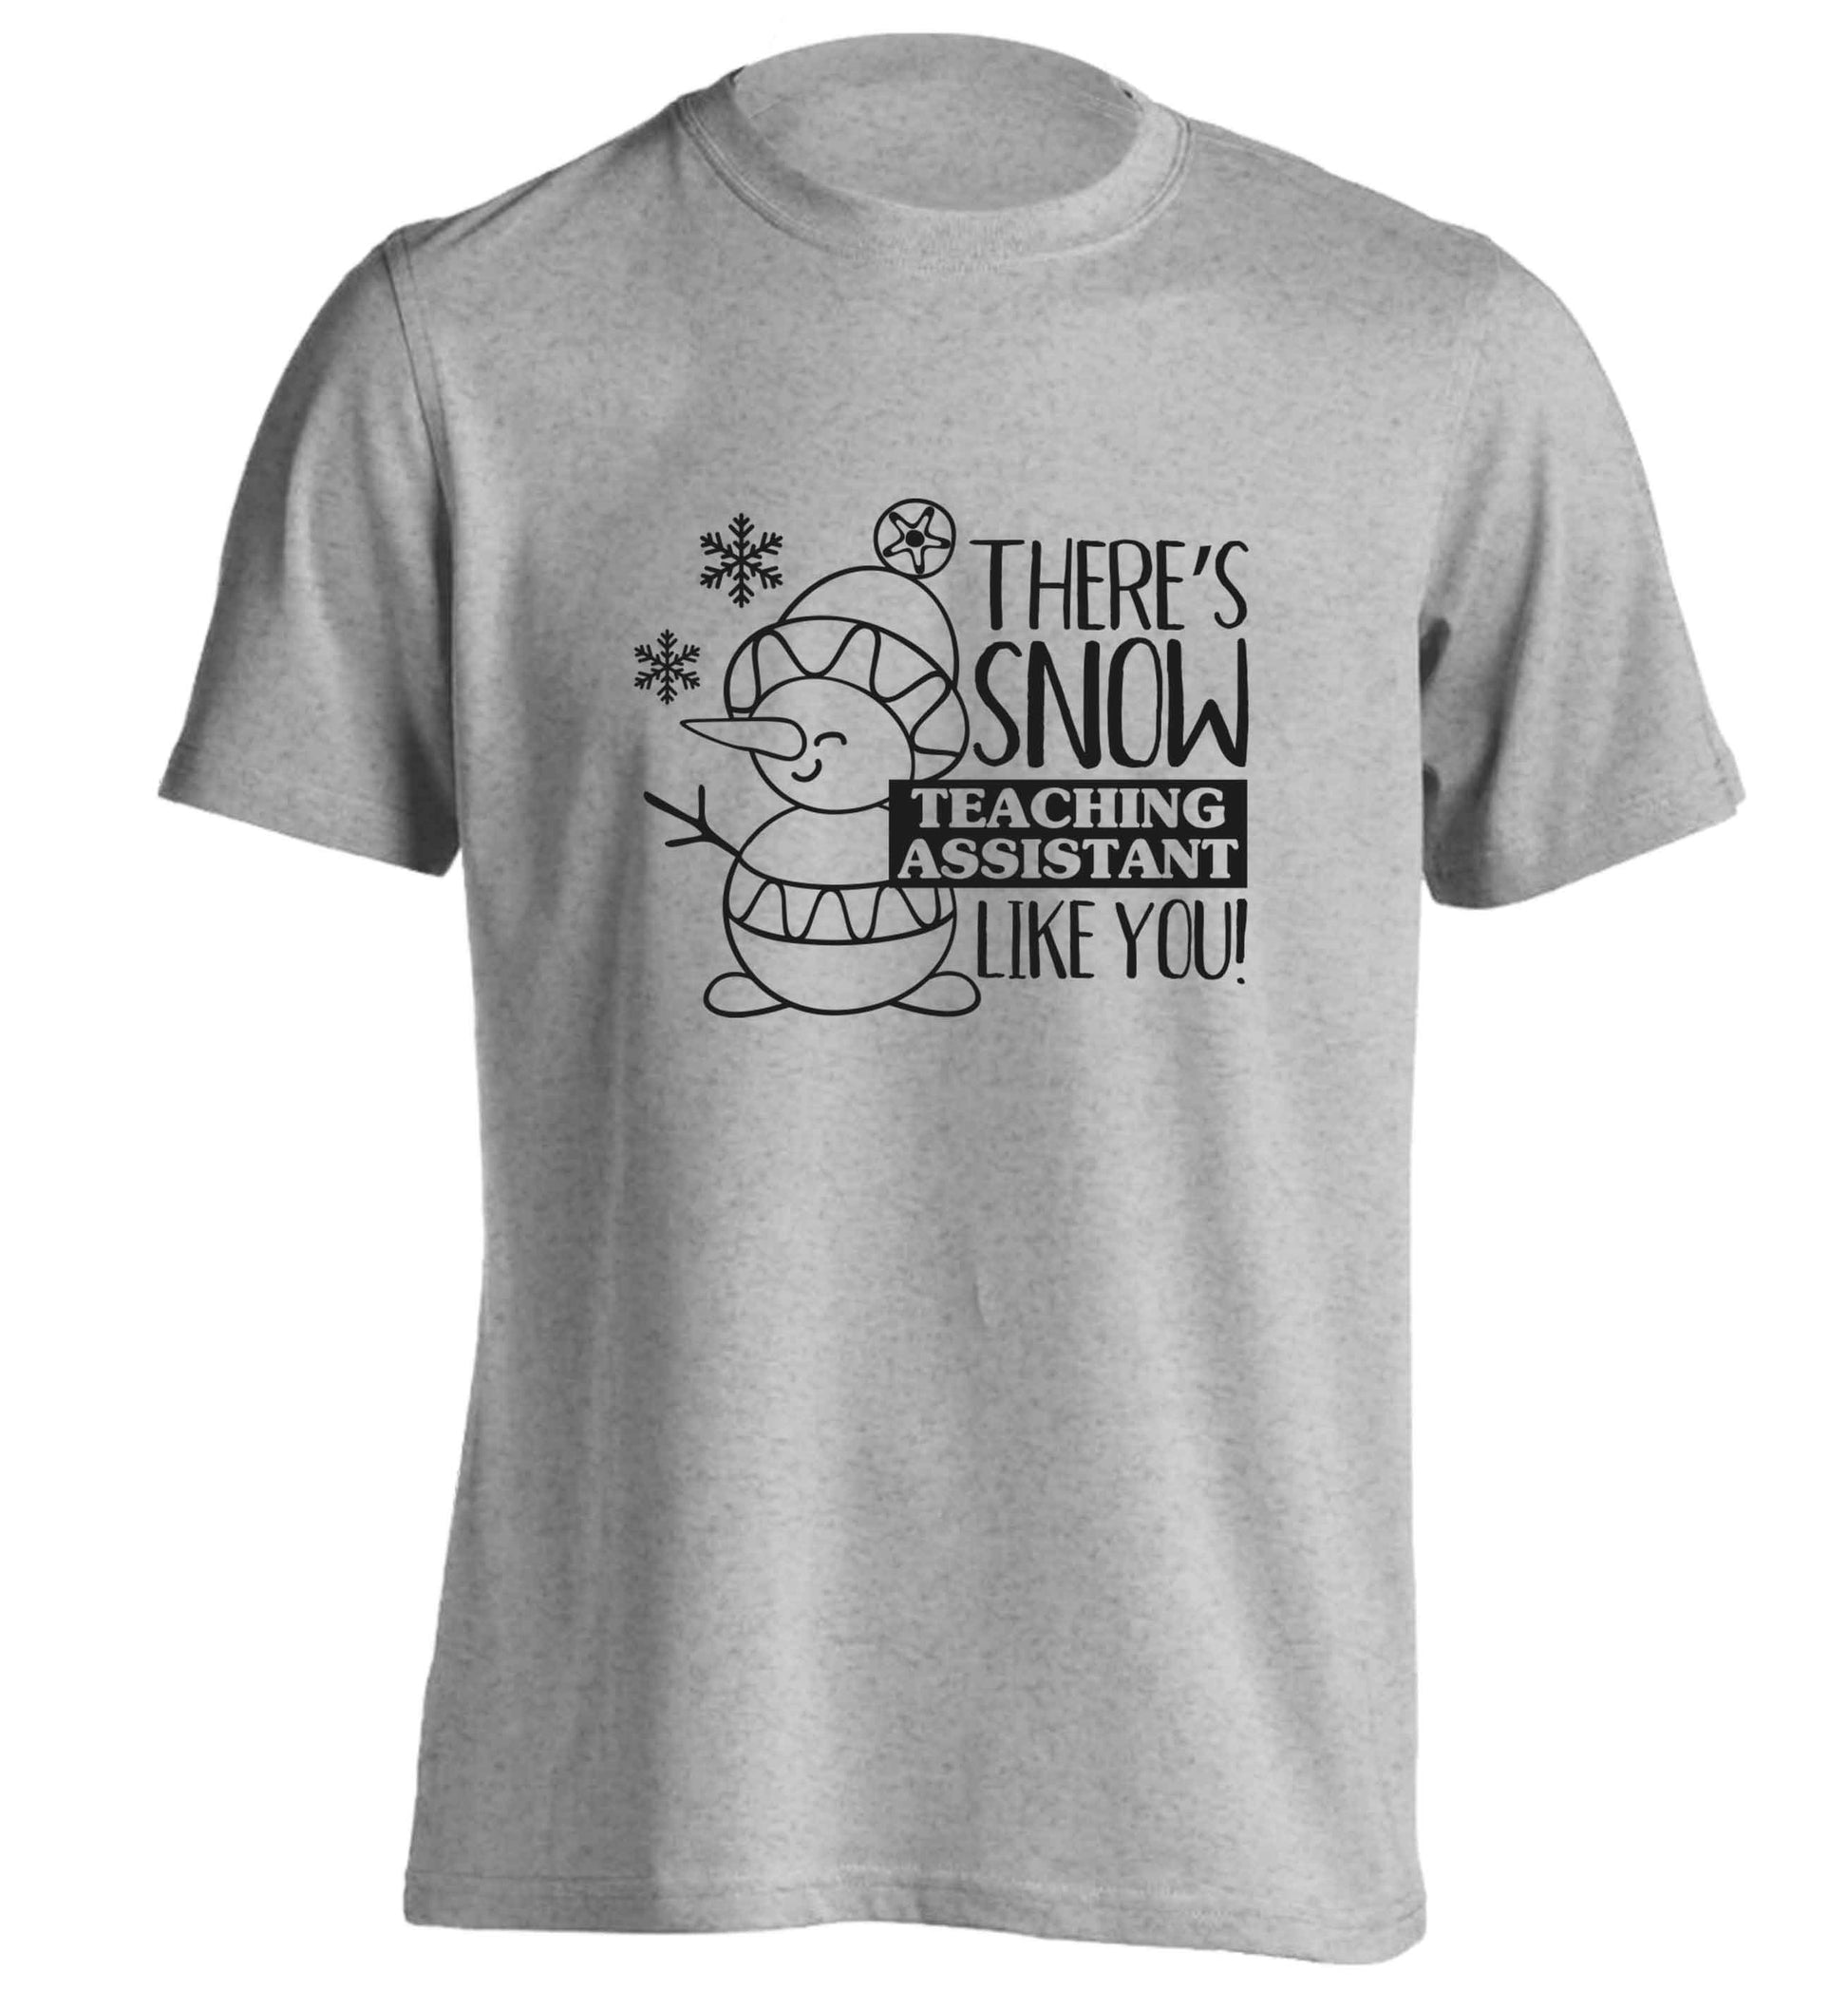 There's snow teaching assistant like you adults unisex grey Tshirt 2XL